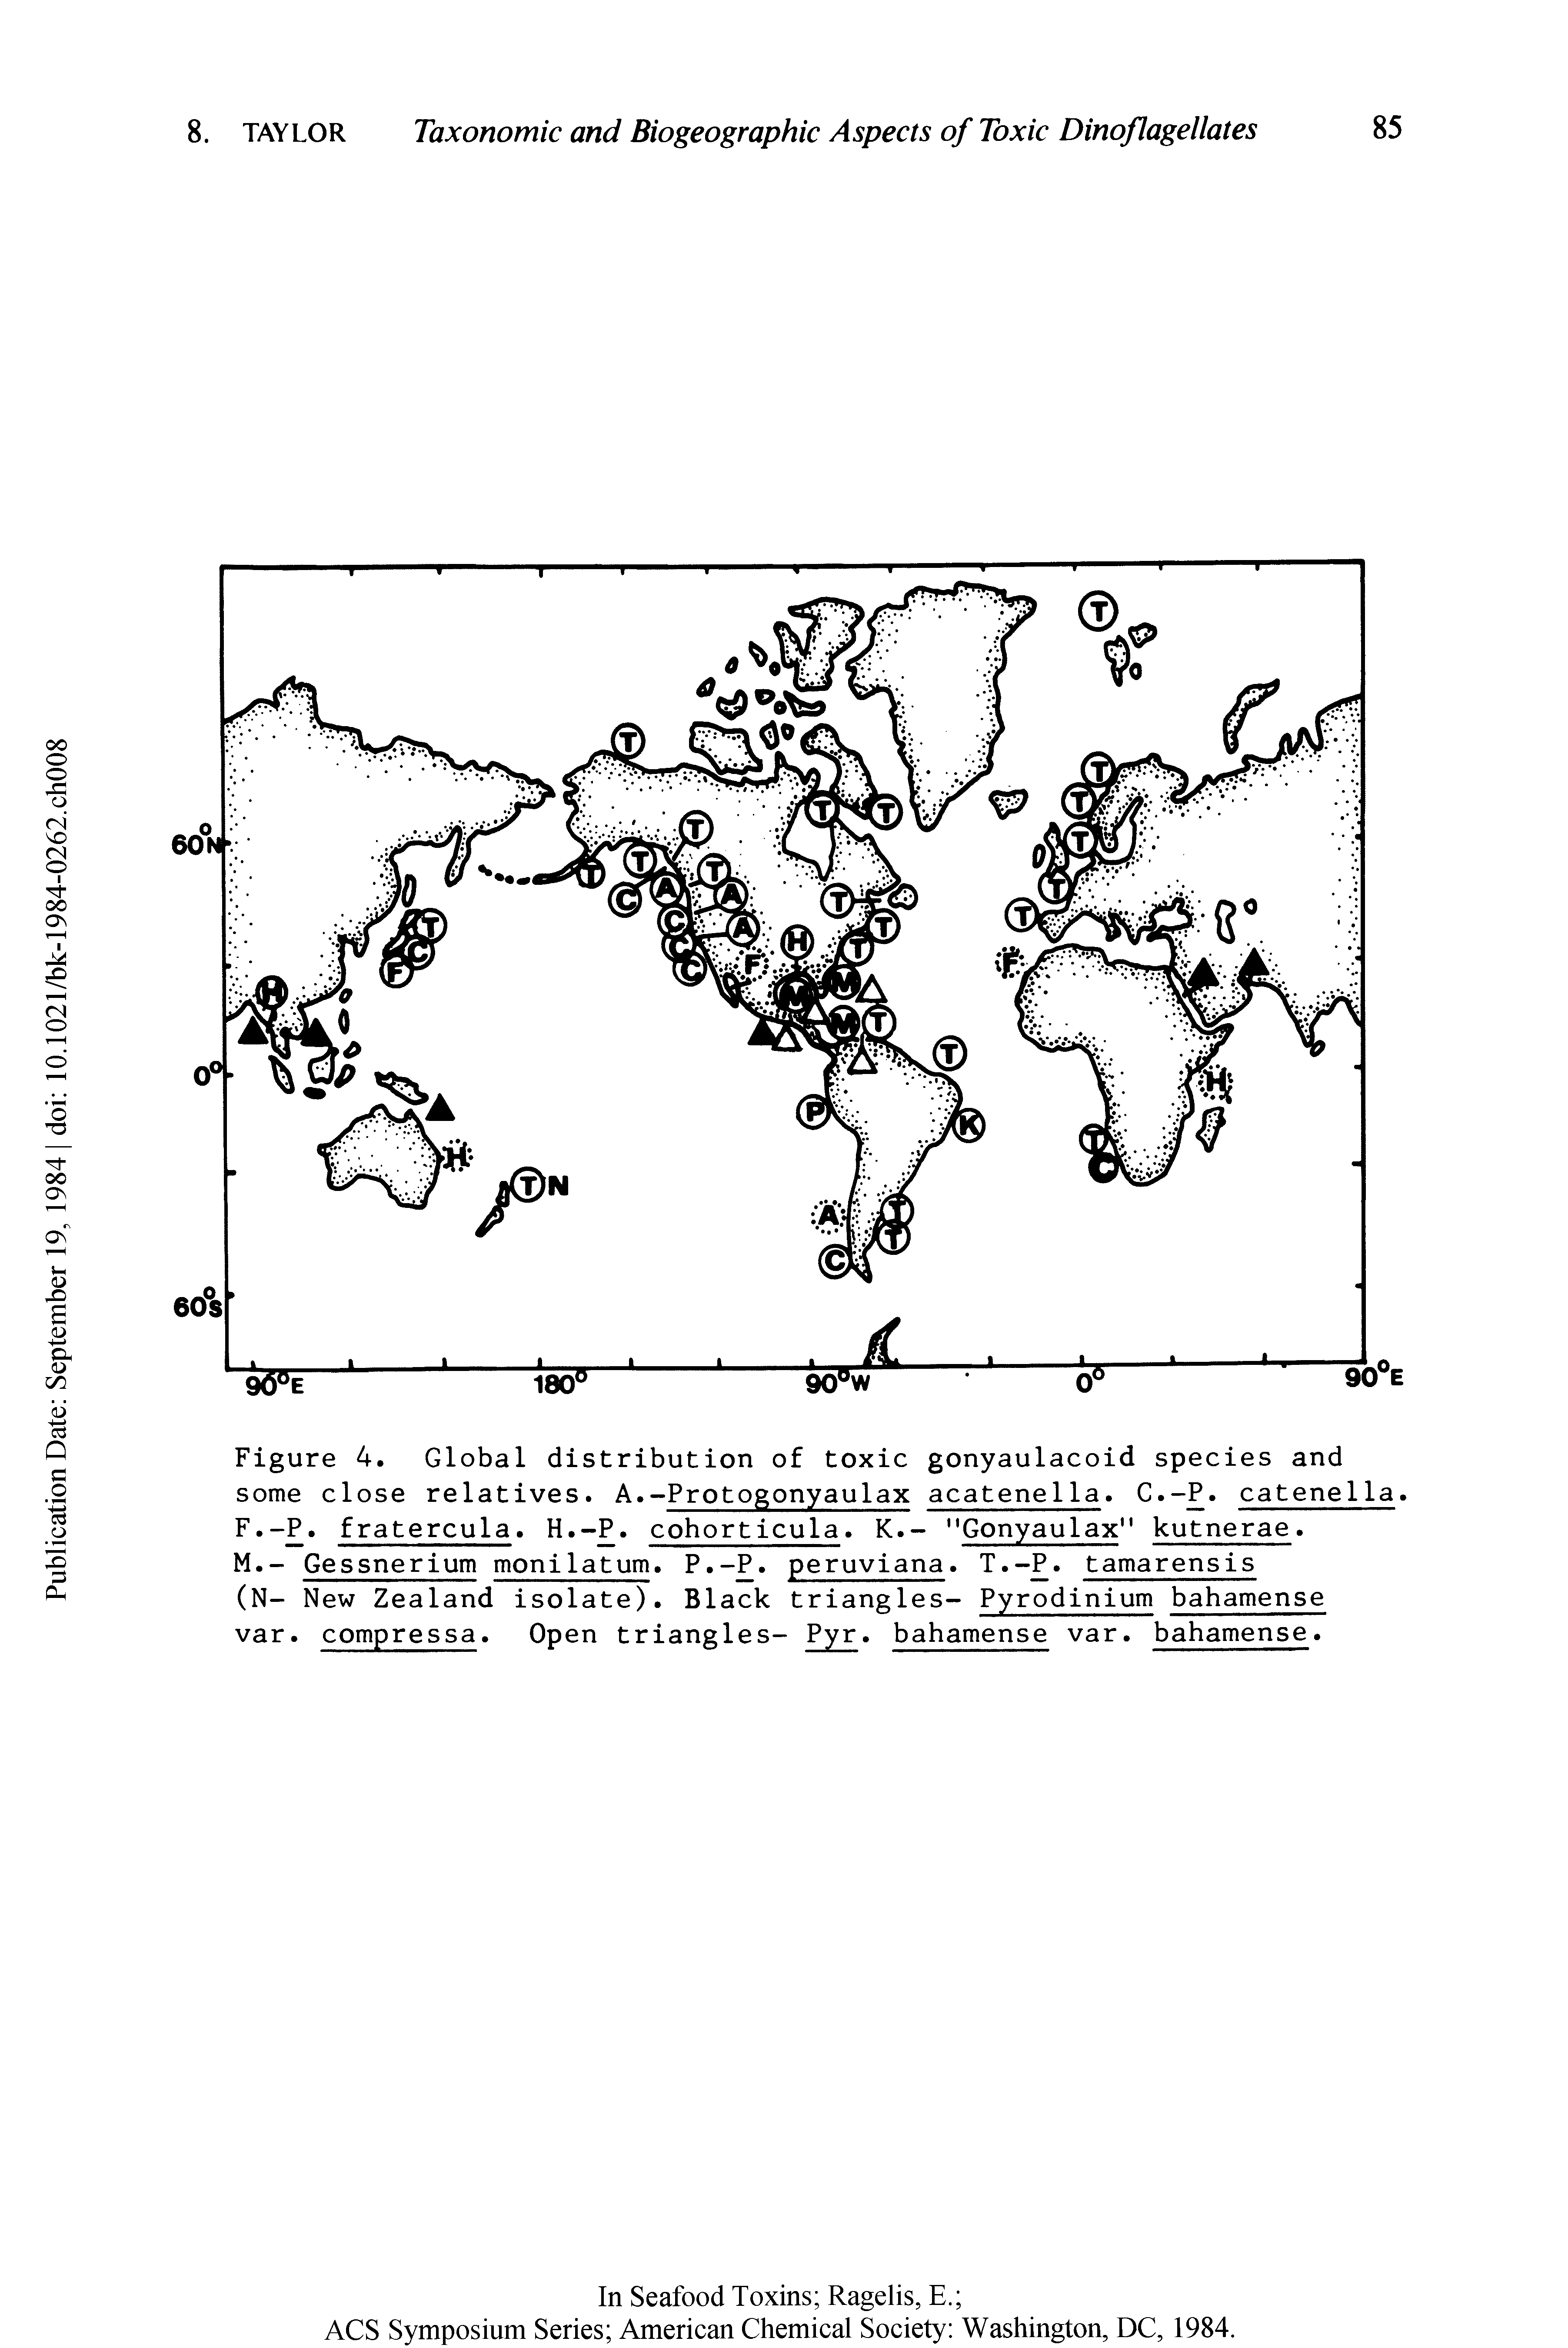 Figure 4. Global distribution of toxic gonyaulacoid species and some close relatives. A.-Protogonyaulax acatenella. C.-P. catenella. F.-P. fratercula. H.-P. cohorticula. K.- "Gonyaulax" kutnerae.